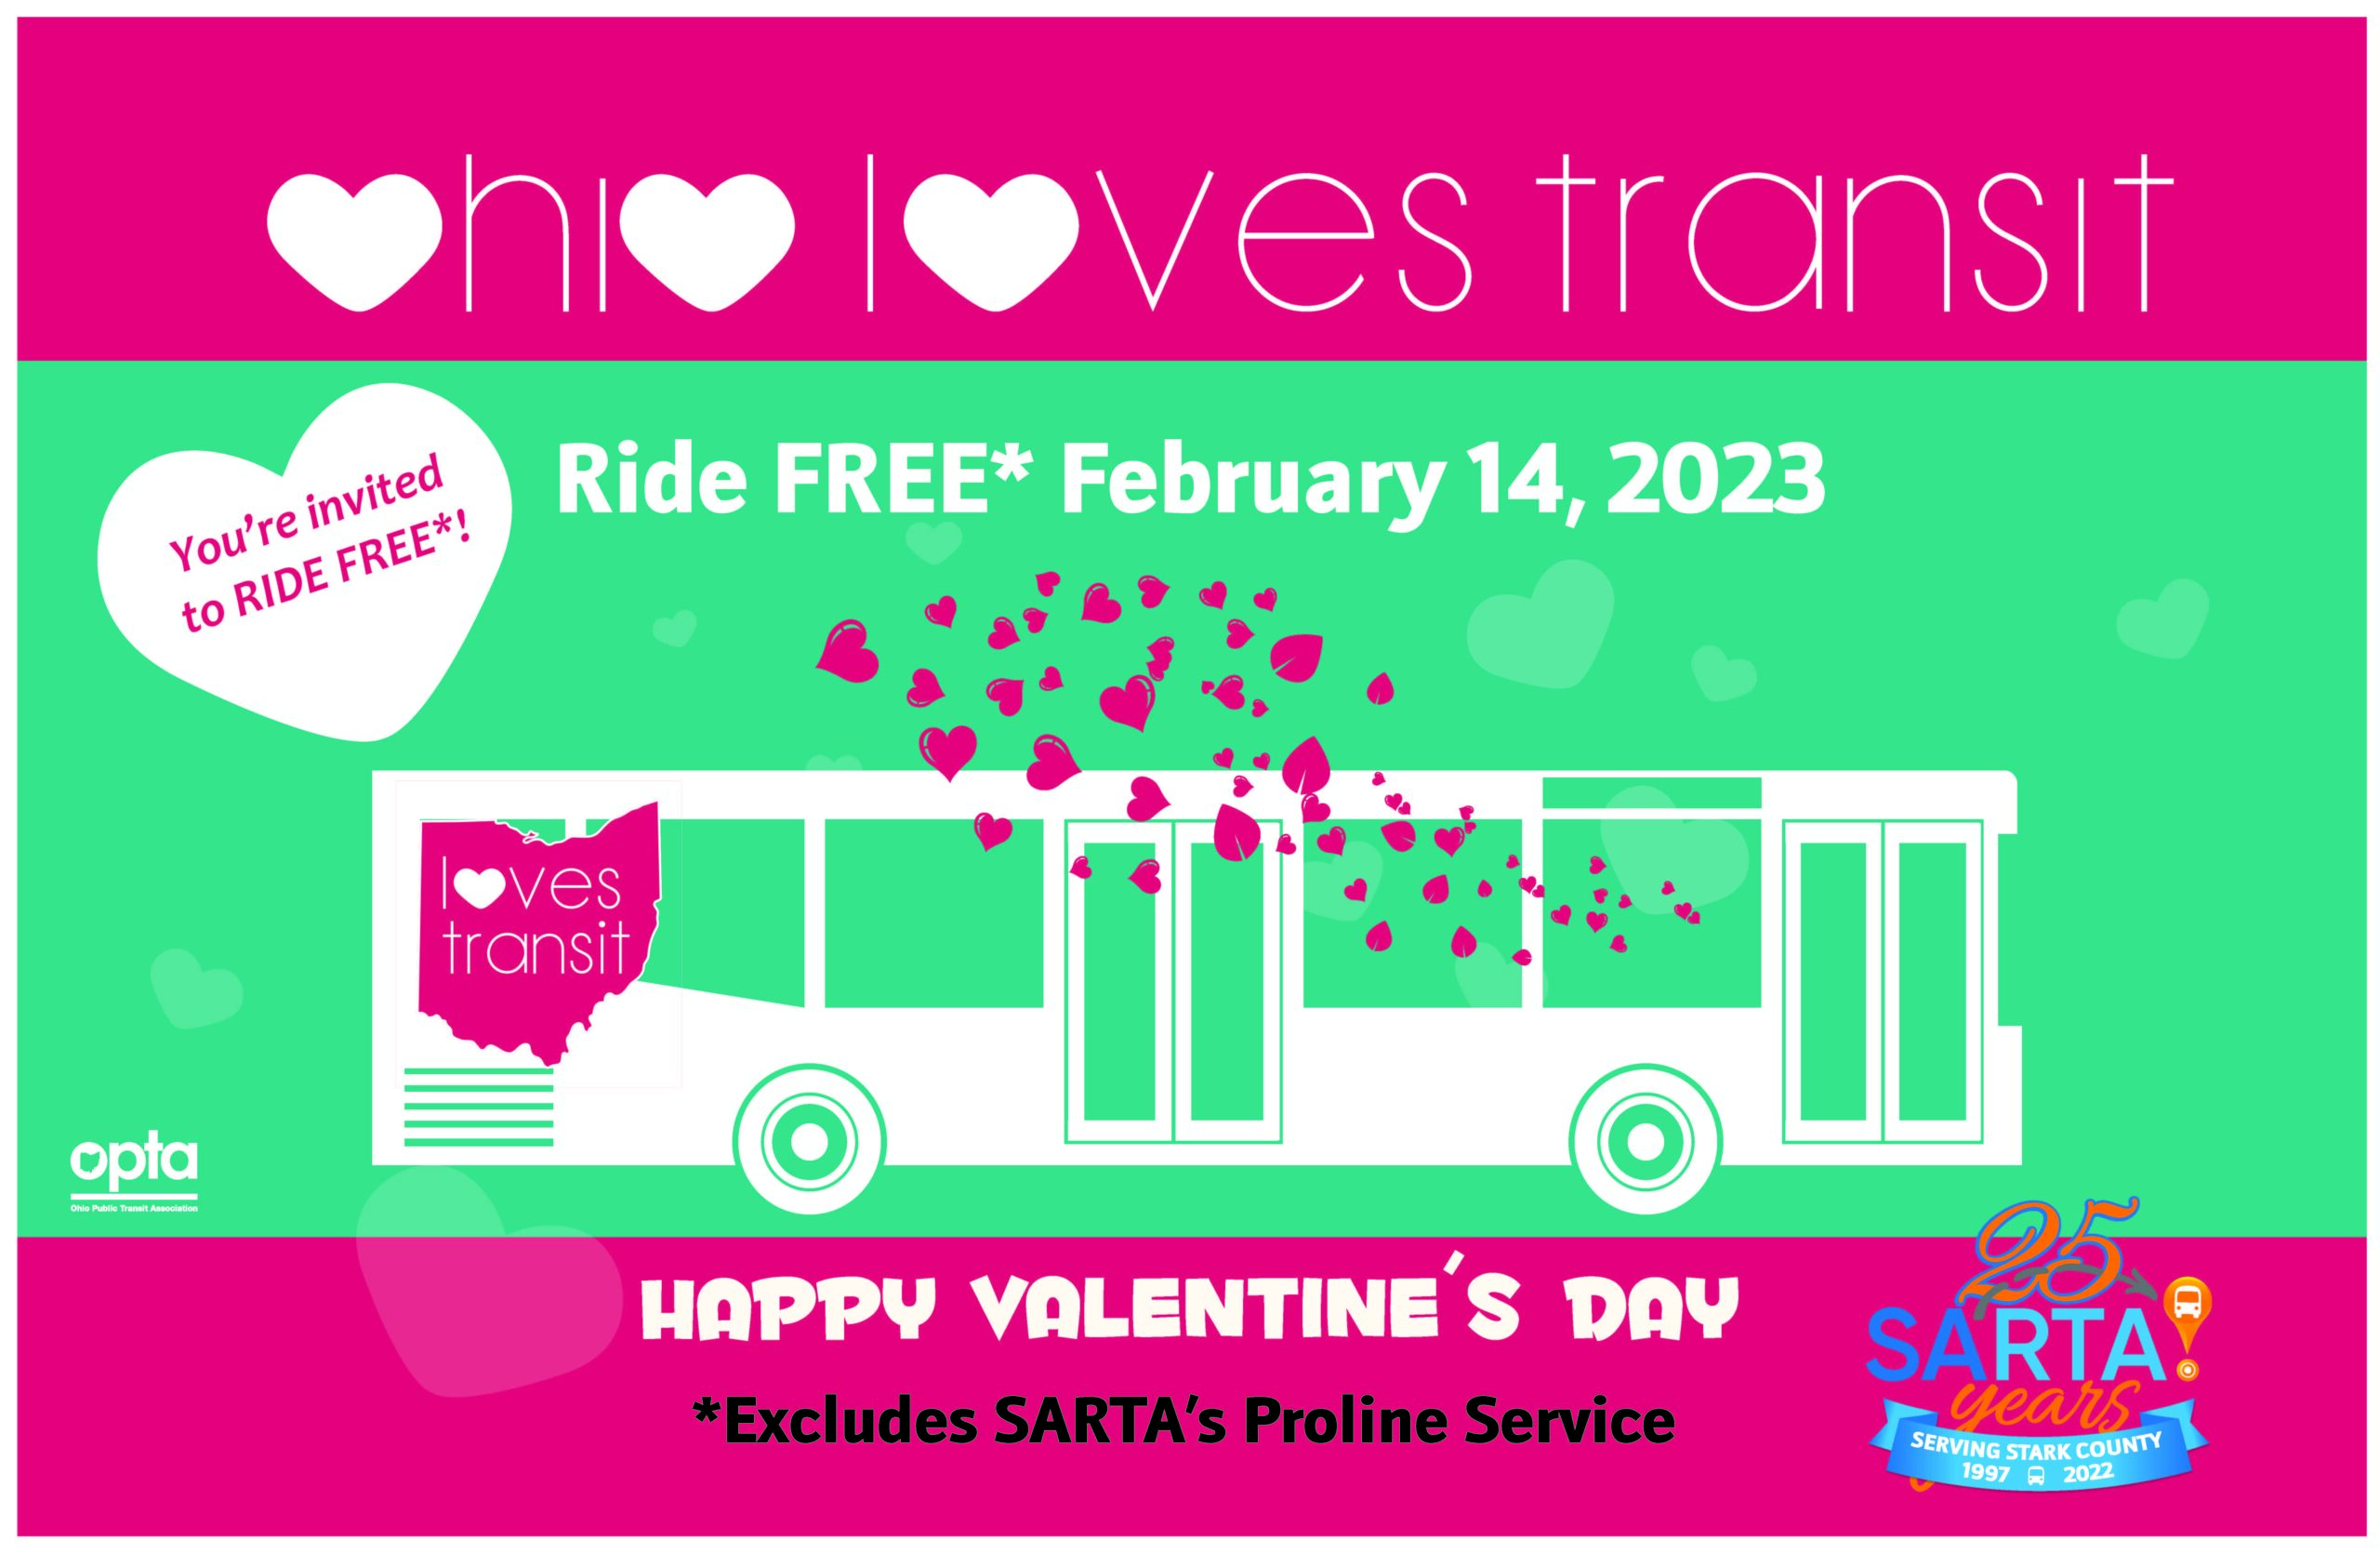 FREE Rides on Fixed Route this Valentine's Day 2023